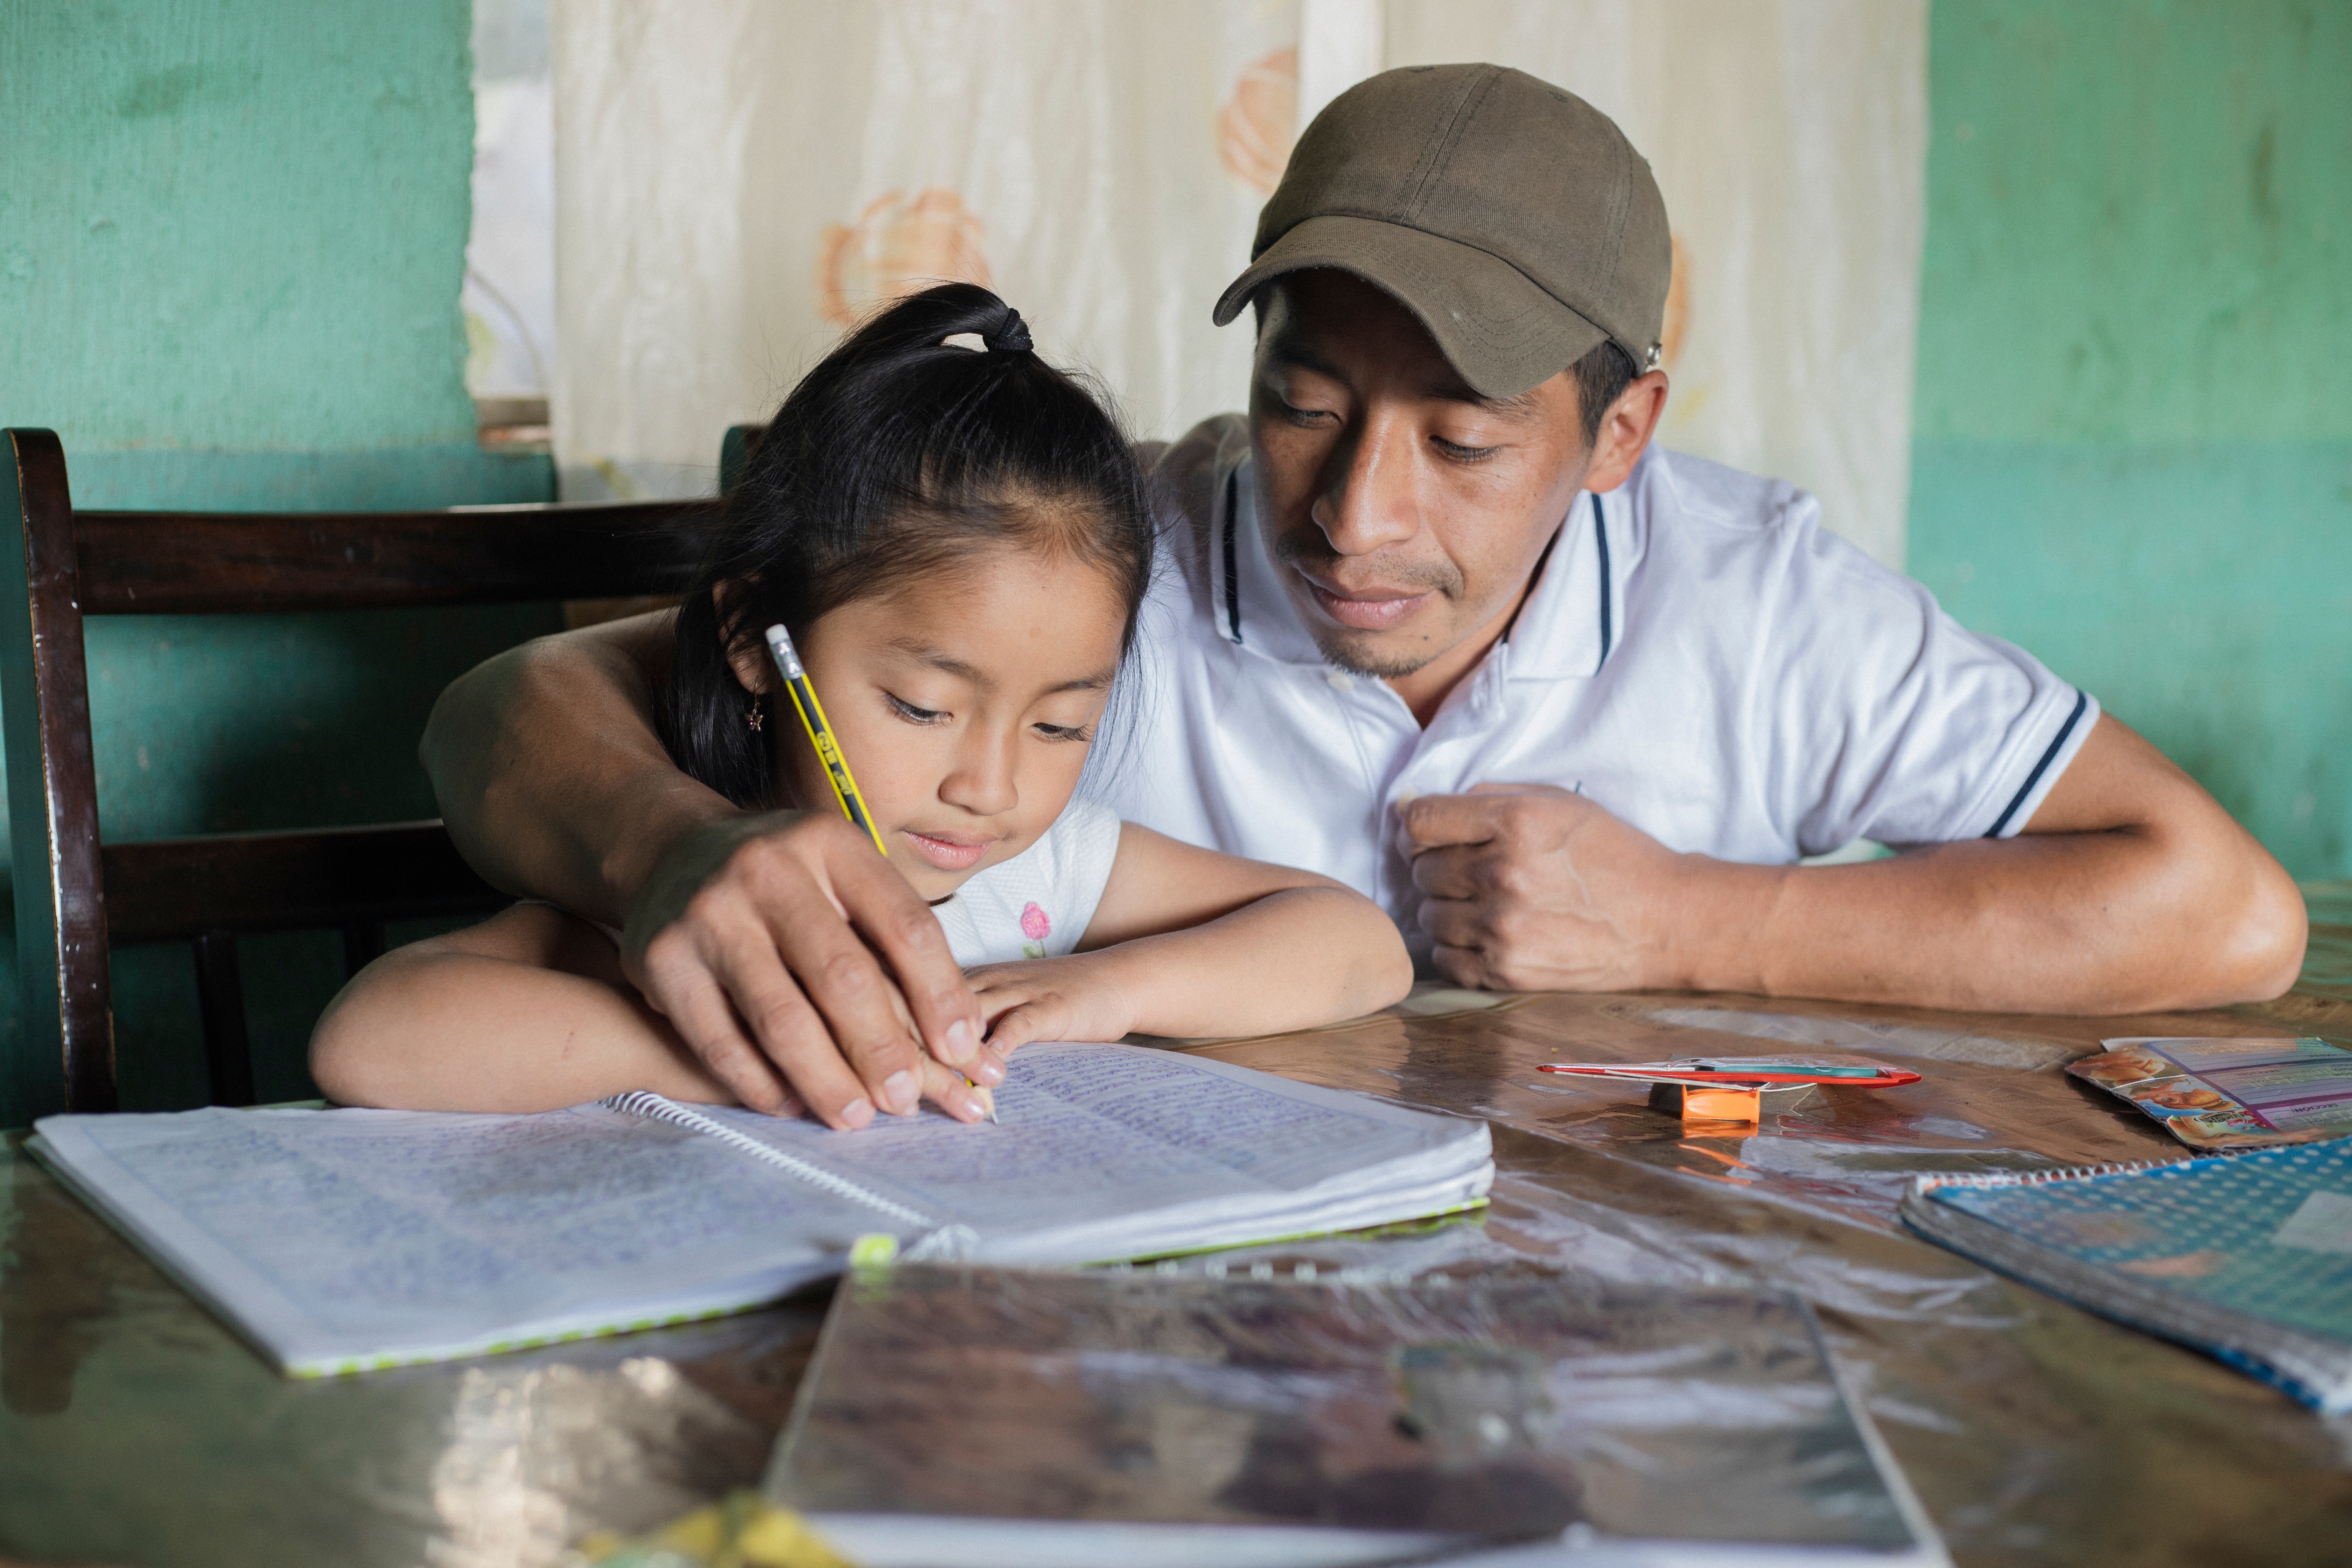 A dad helping his young girl with homework